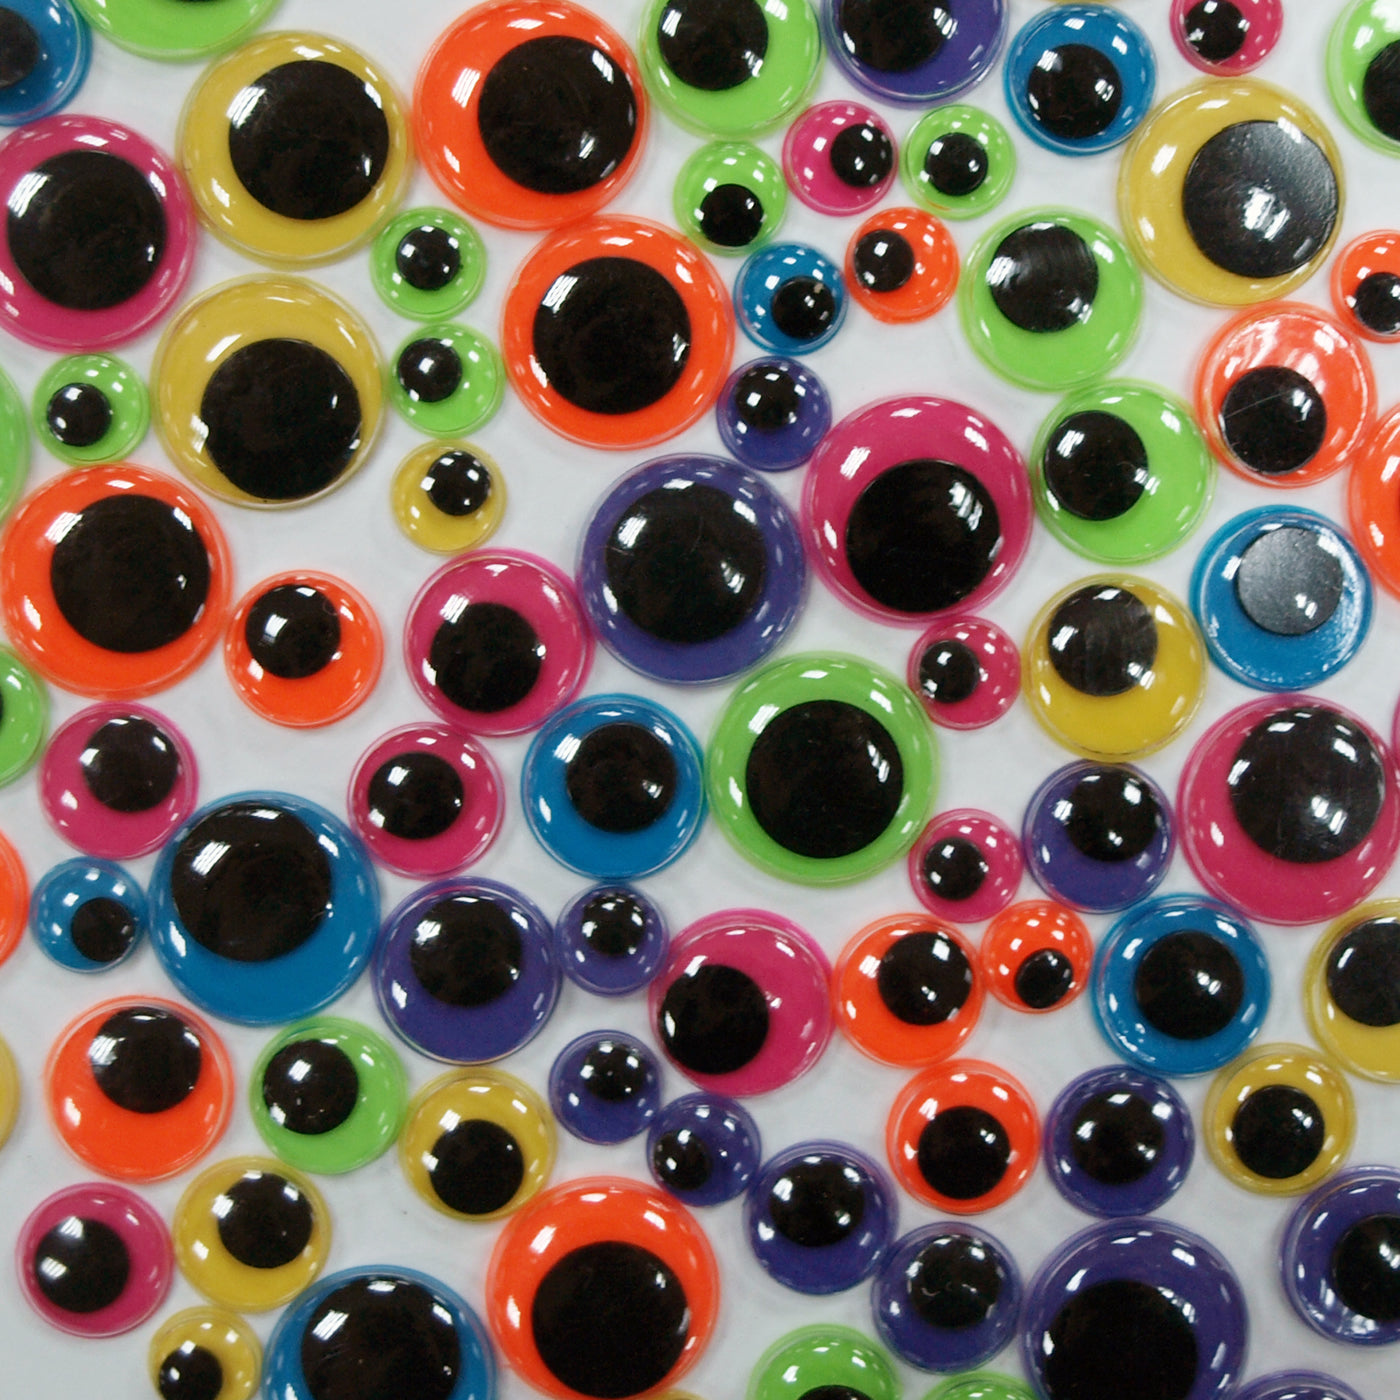 Colorations® Self-Adhesive Wiggly Eyes, Black - 100 Pieces